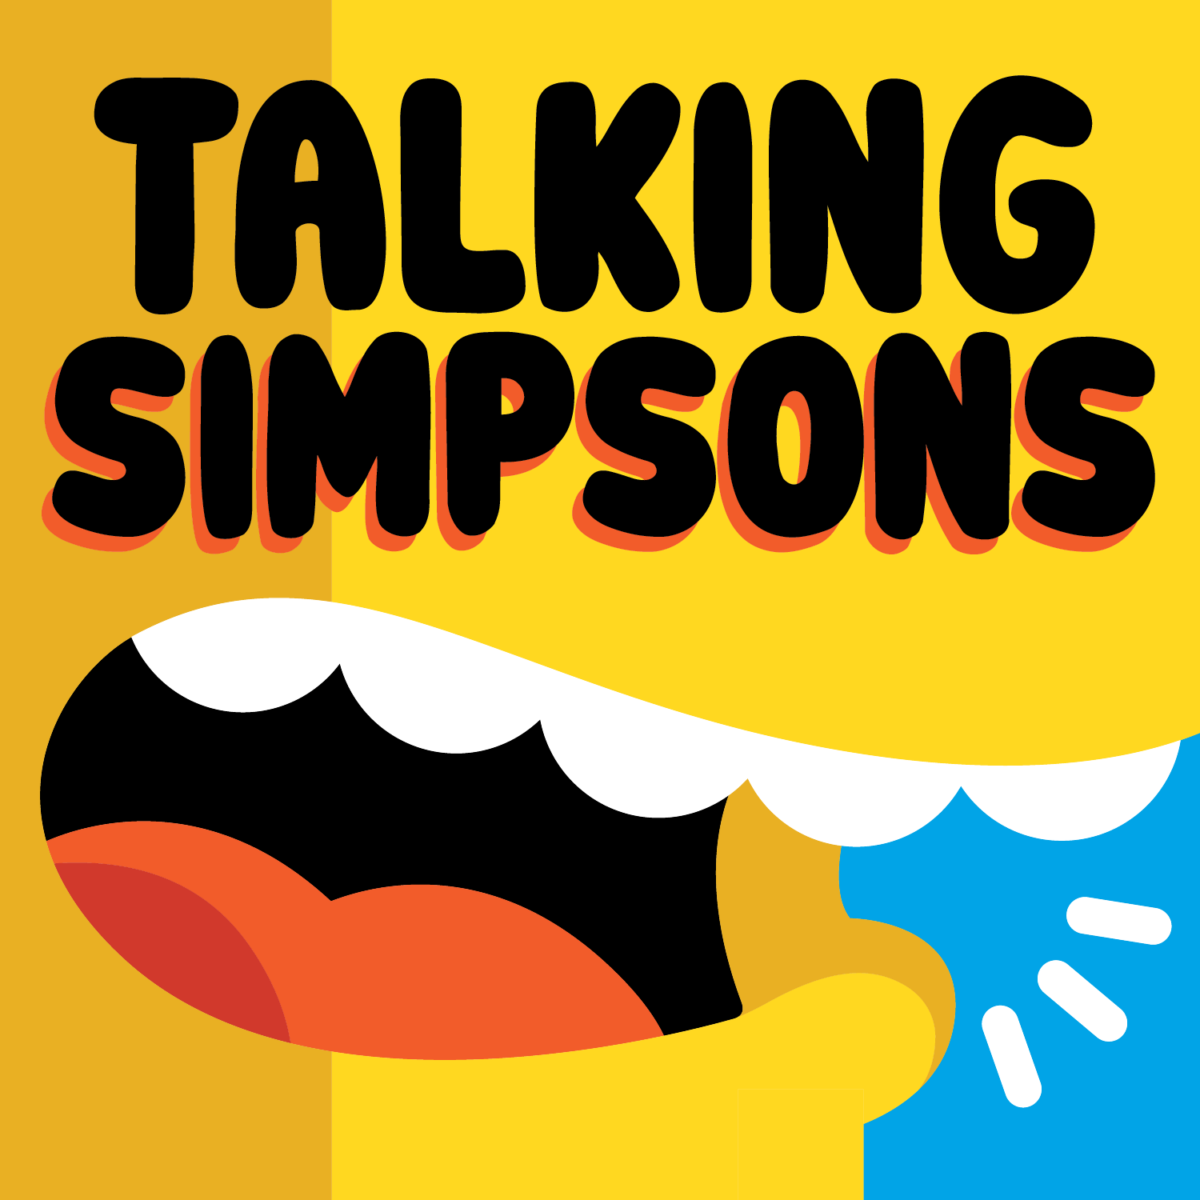 Talking Simpsons logo with text